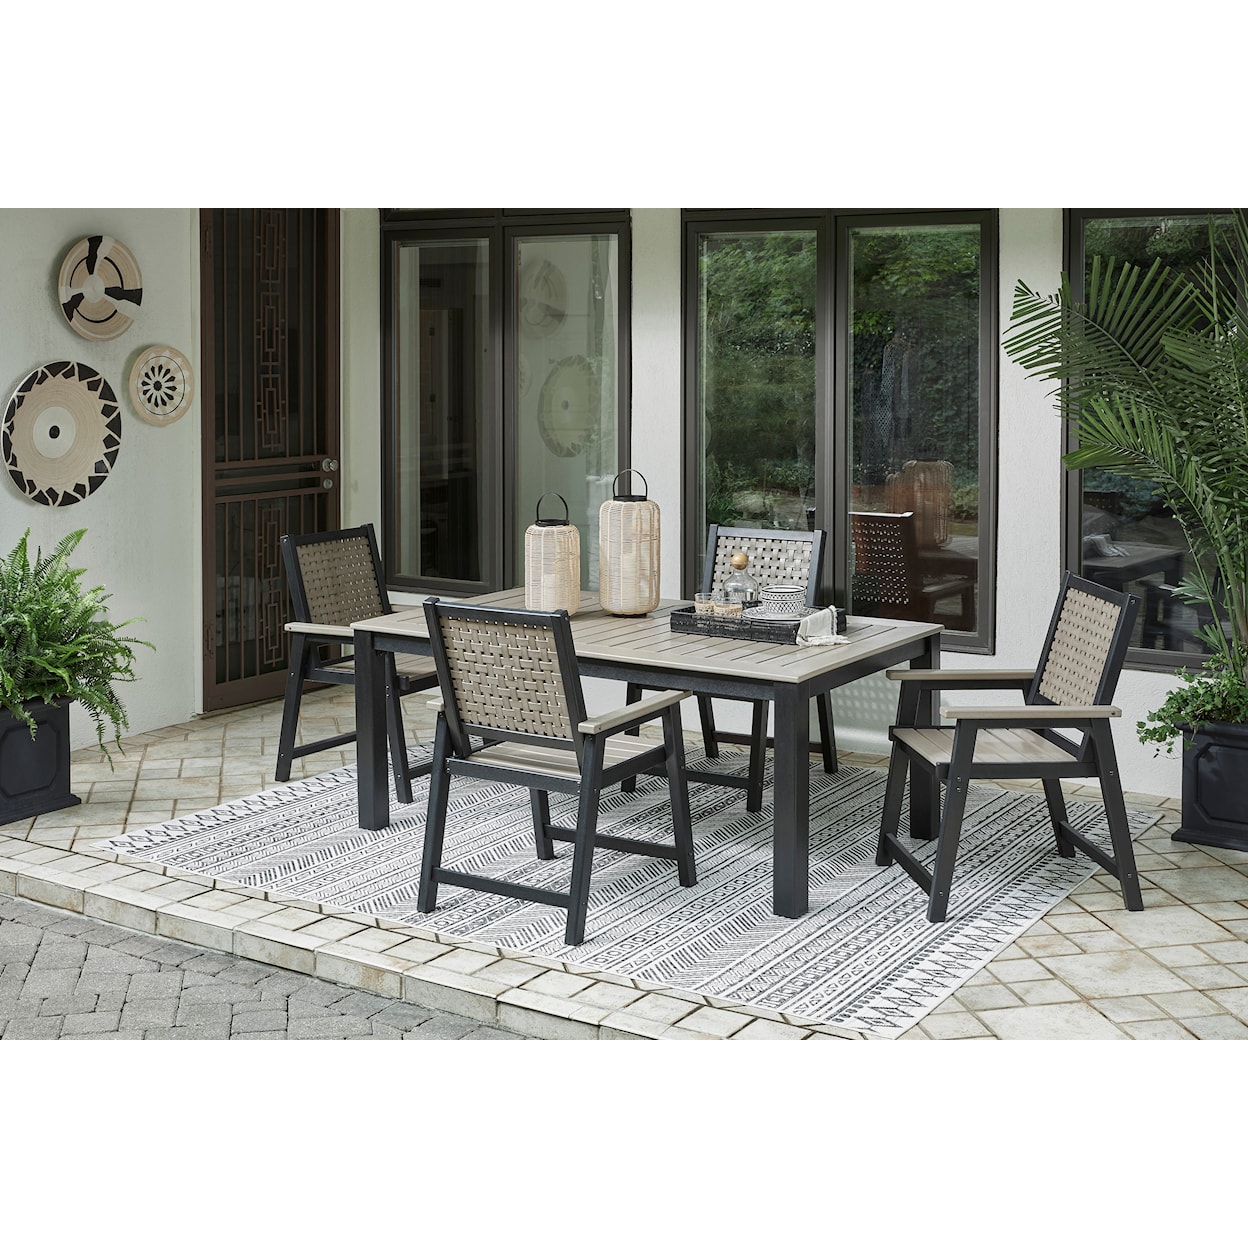 Signature Design by Ashley Mount Valley Outdoor Dining Set